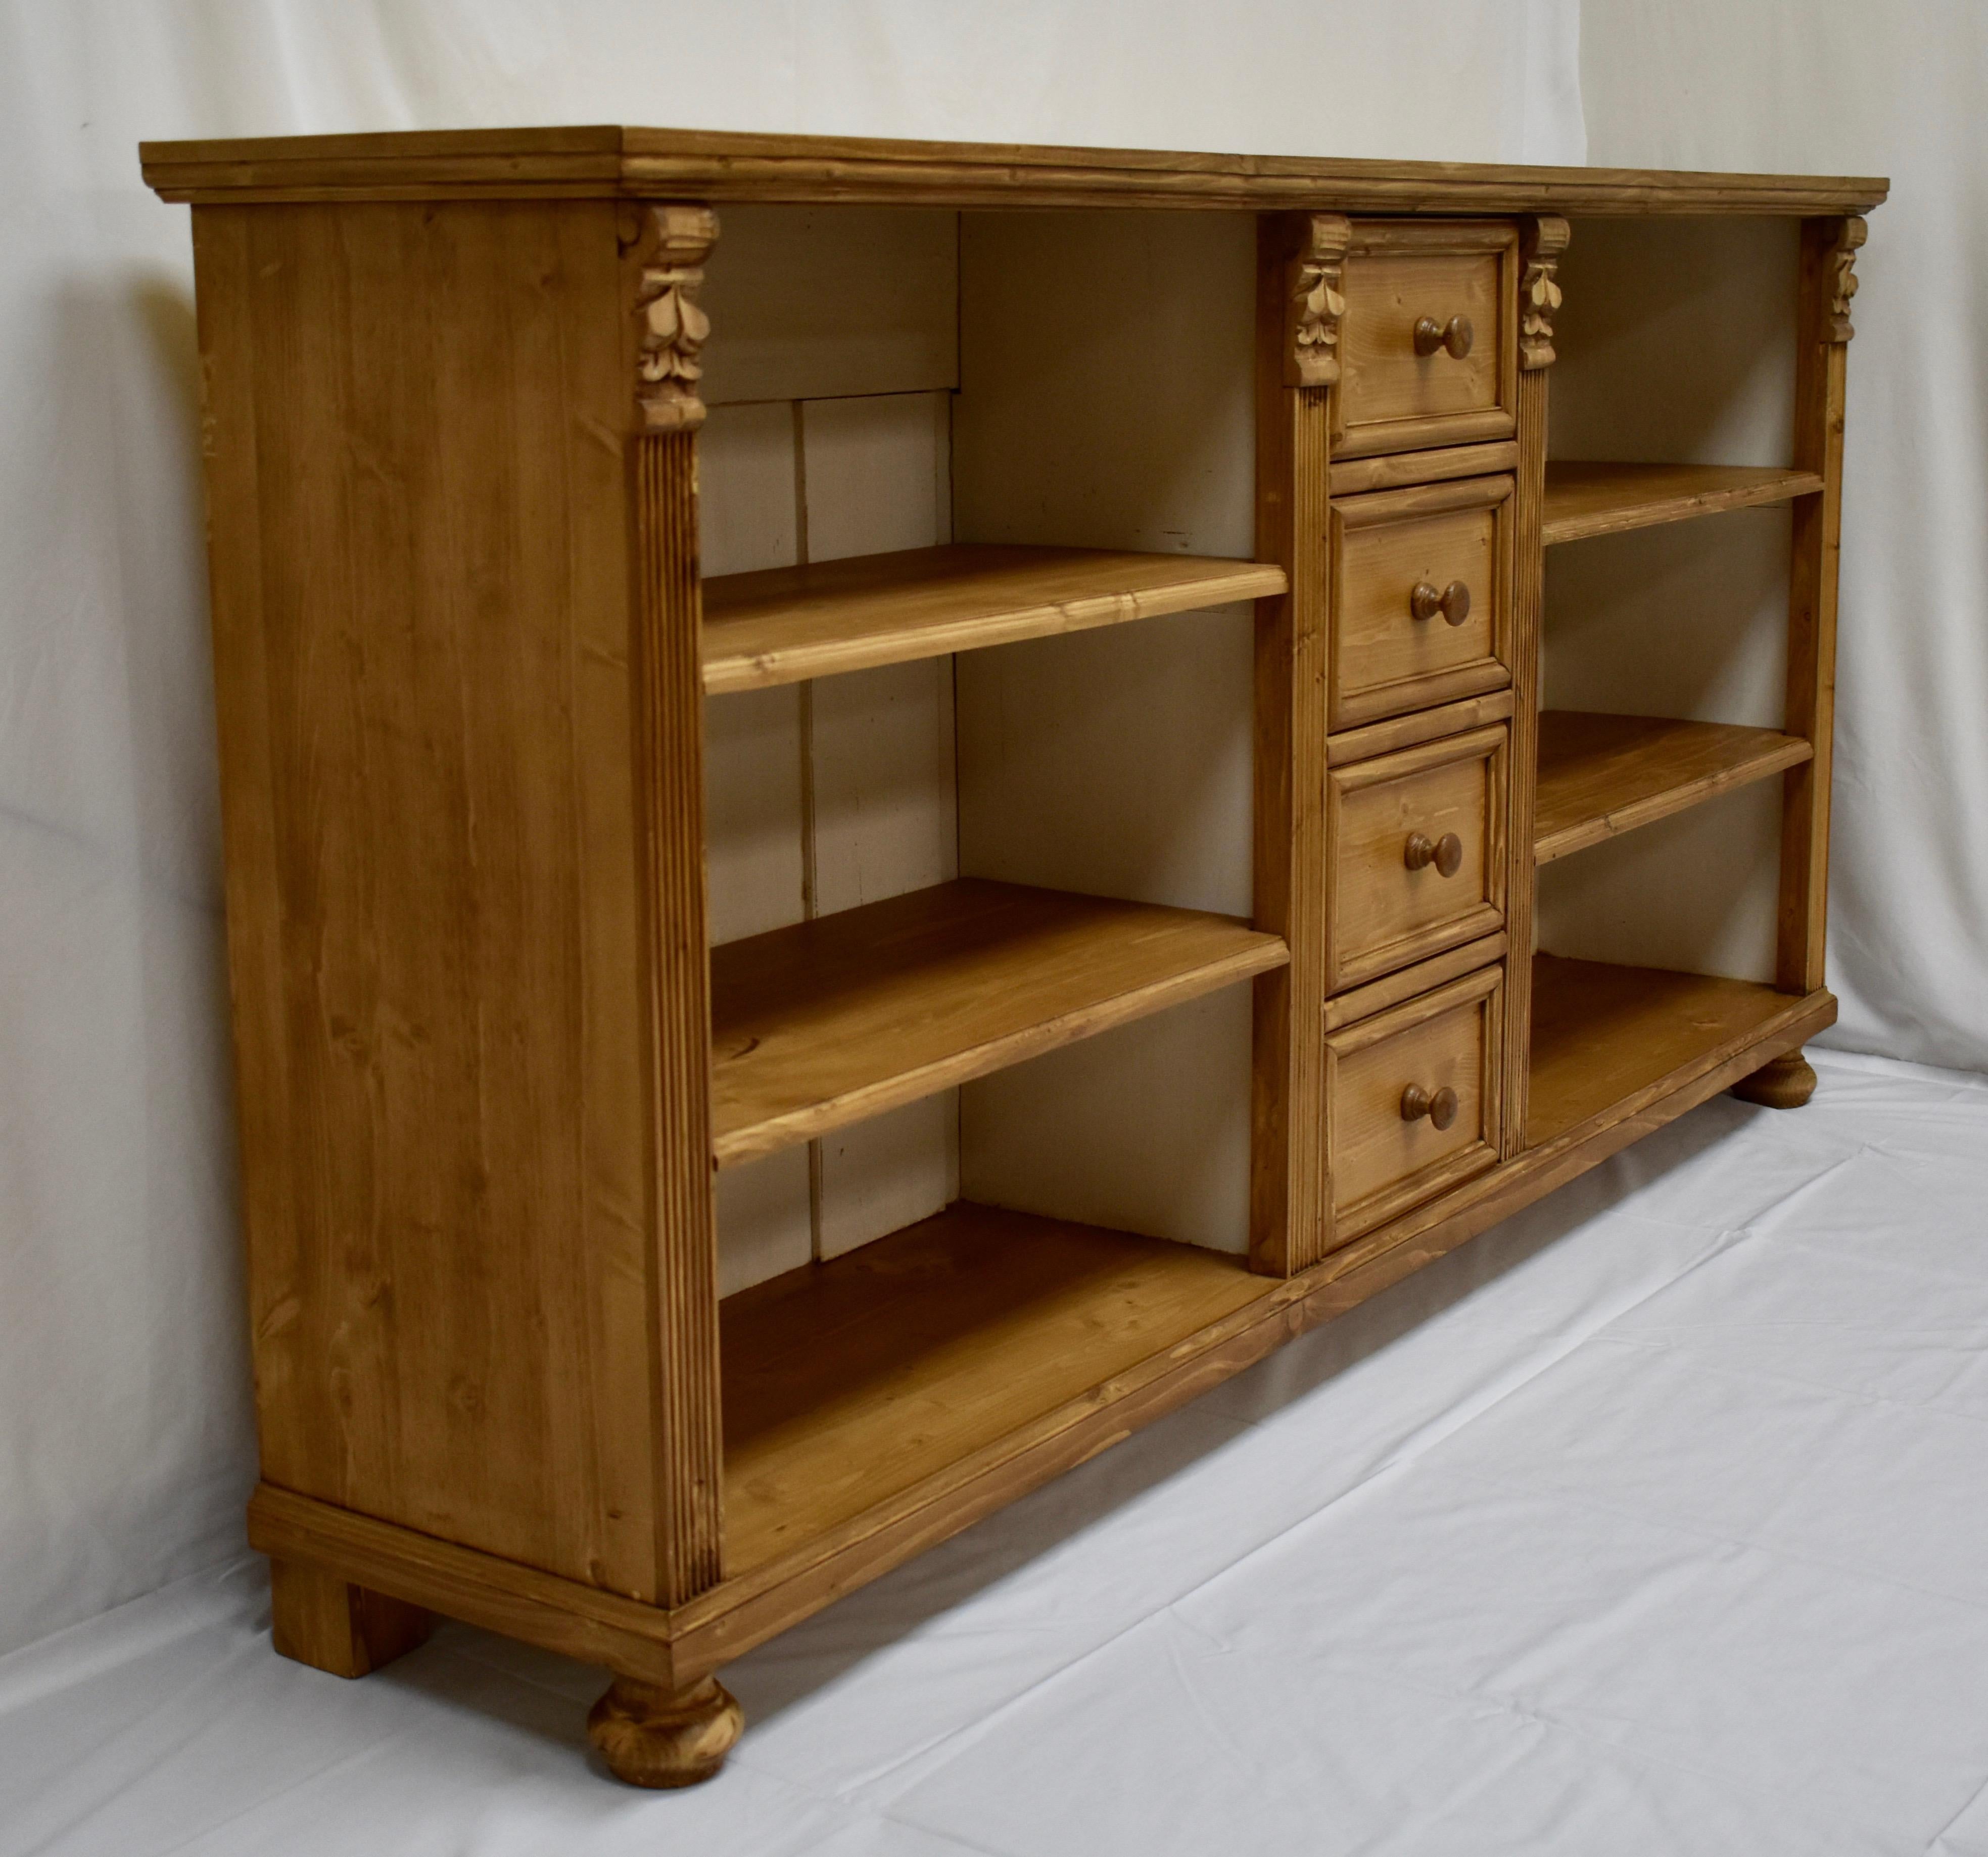 Hand-Painted Long Pine Bookcase with Four Drawers